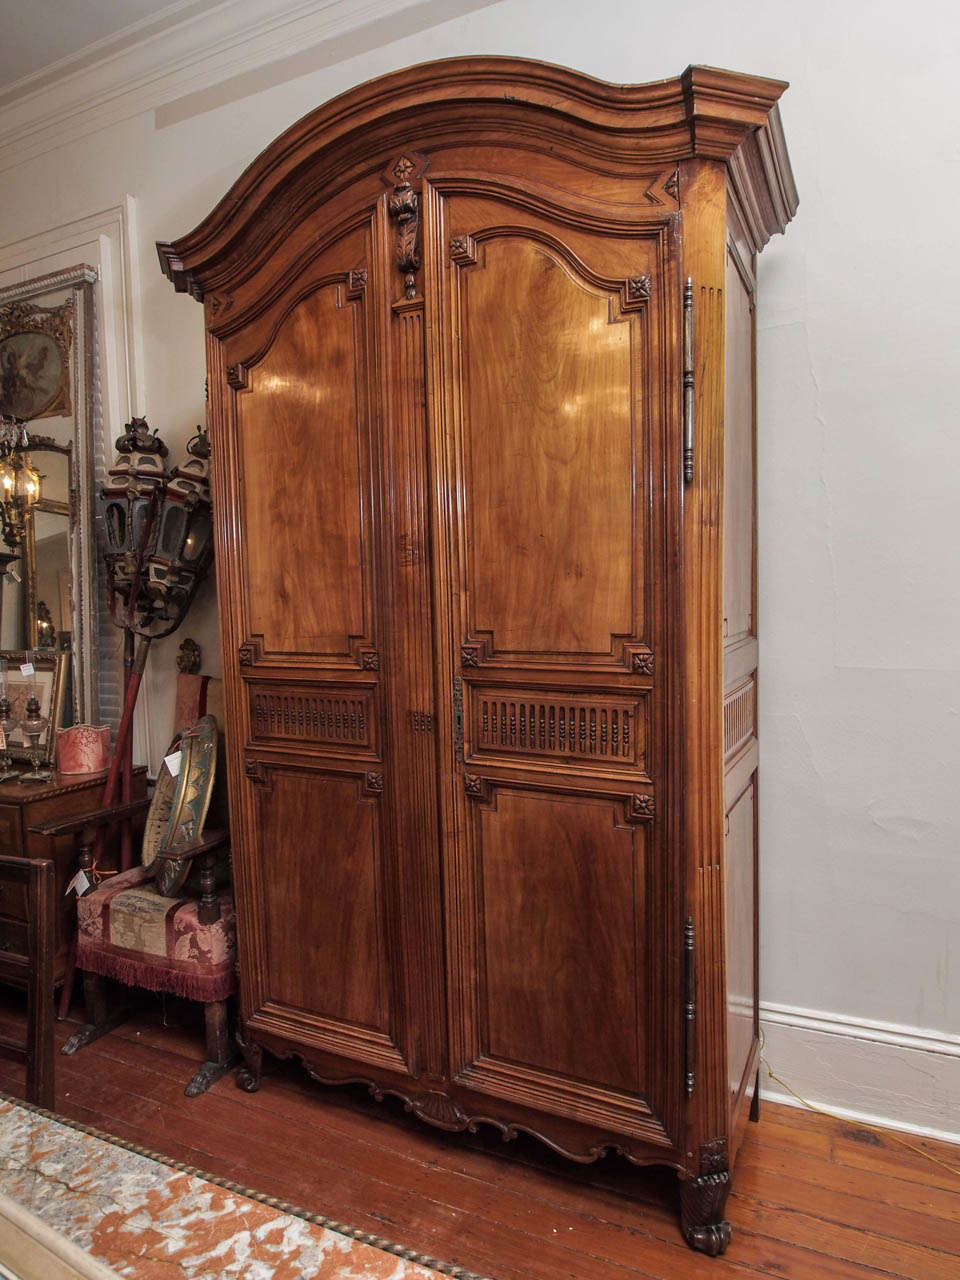 A Louis XVI armoire, from Bordeaux, having an arched and deeply molded cornice over a frieze with carved rosette atop a bracket, the doors conforming to the cornice, and having central panels with asparagus fluting. The canted rails and center faux